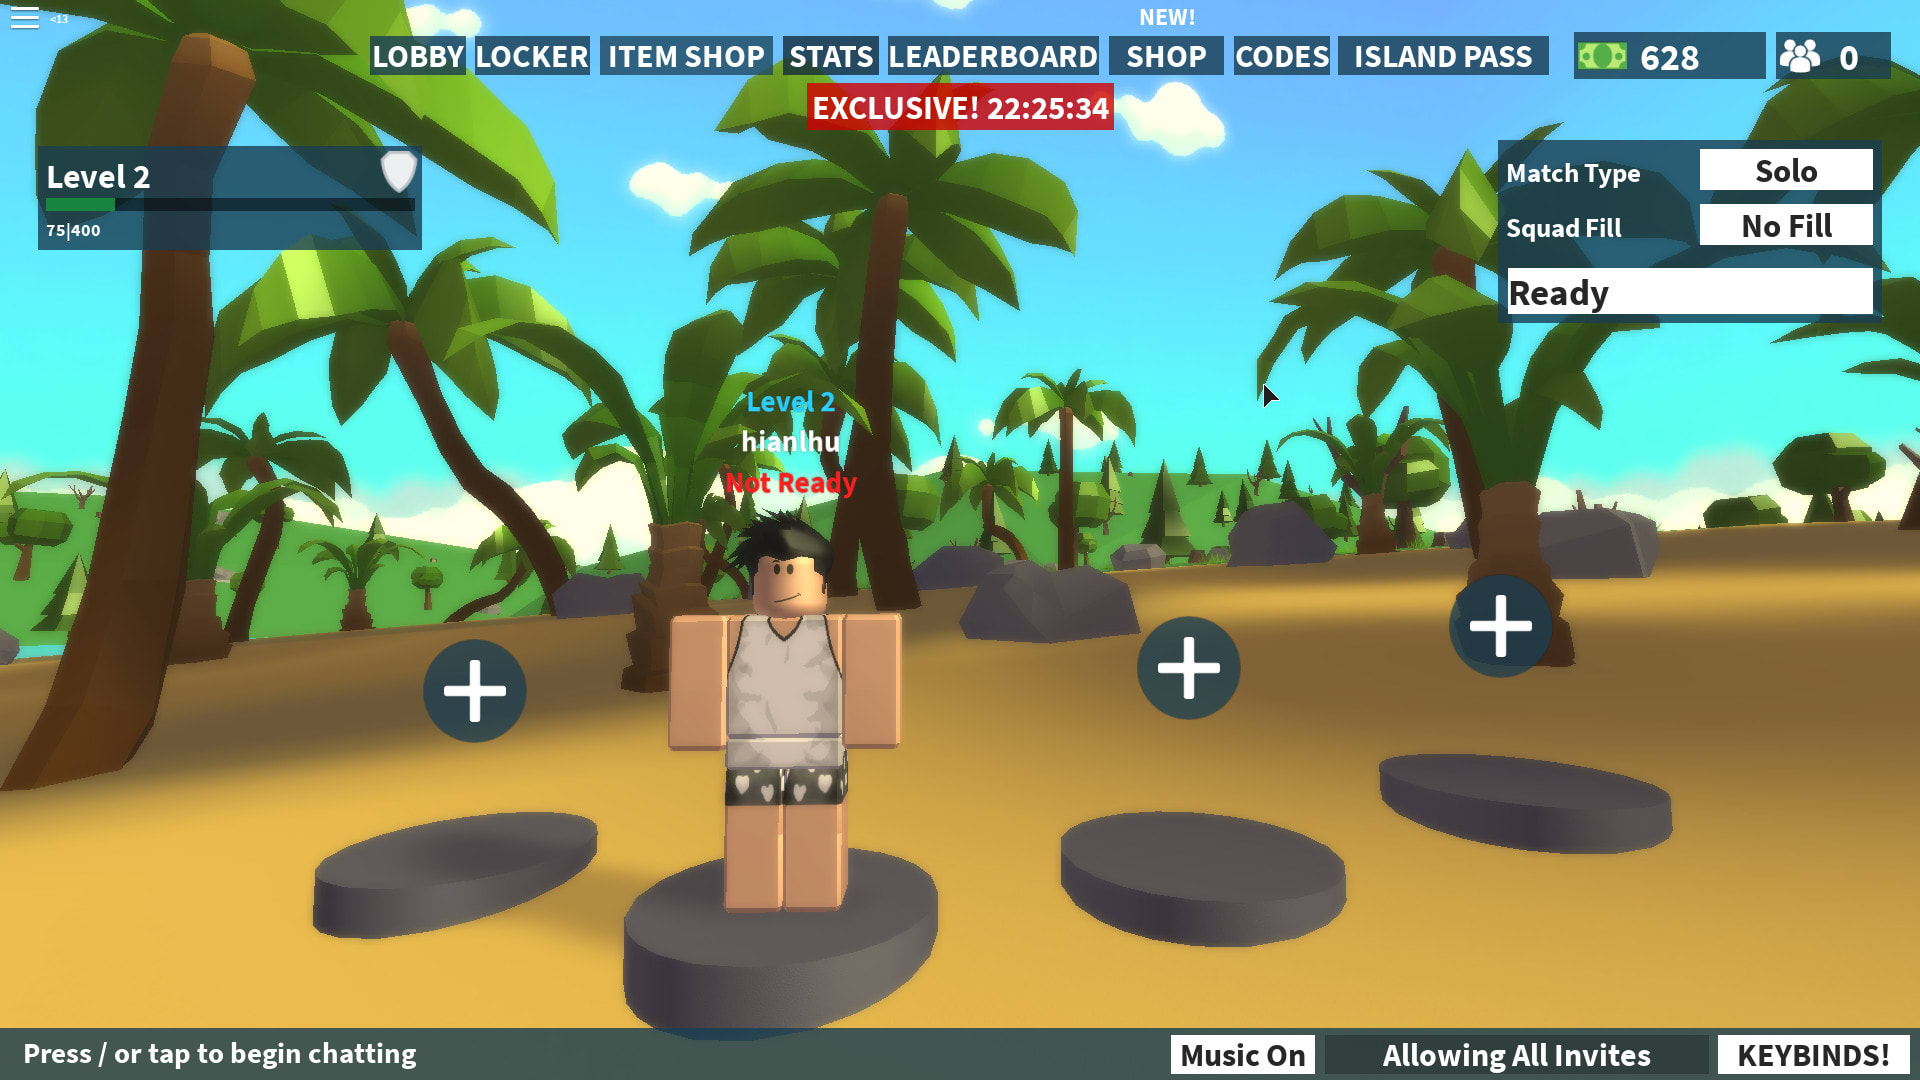 Play roblox with you for 2 hours by Iamtotallylegit